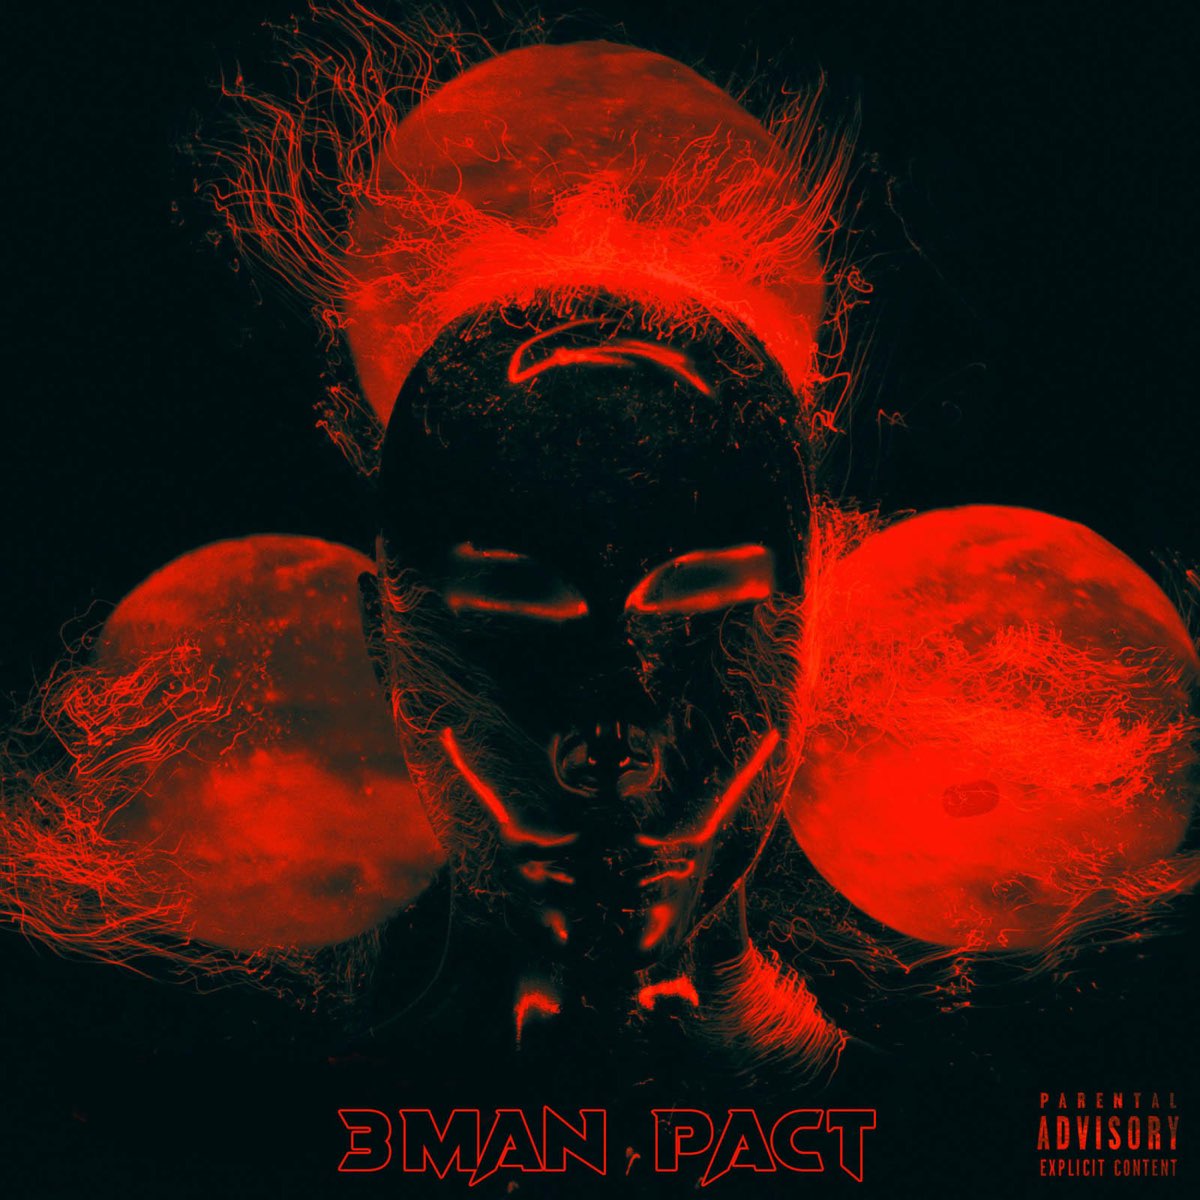 ‎3 Man Pact by G Will & Enzmatic on Apple Music